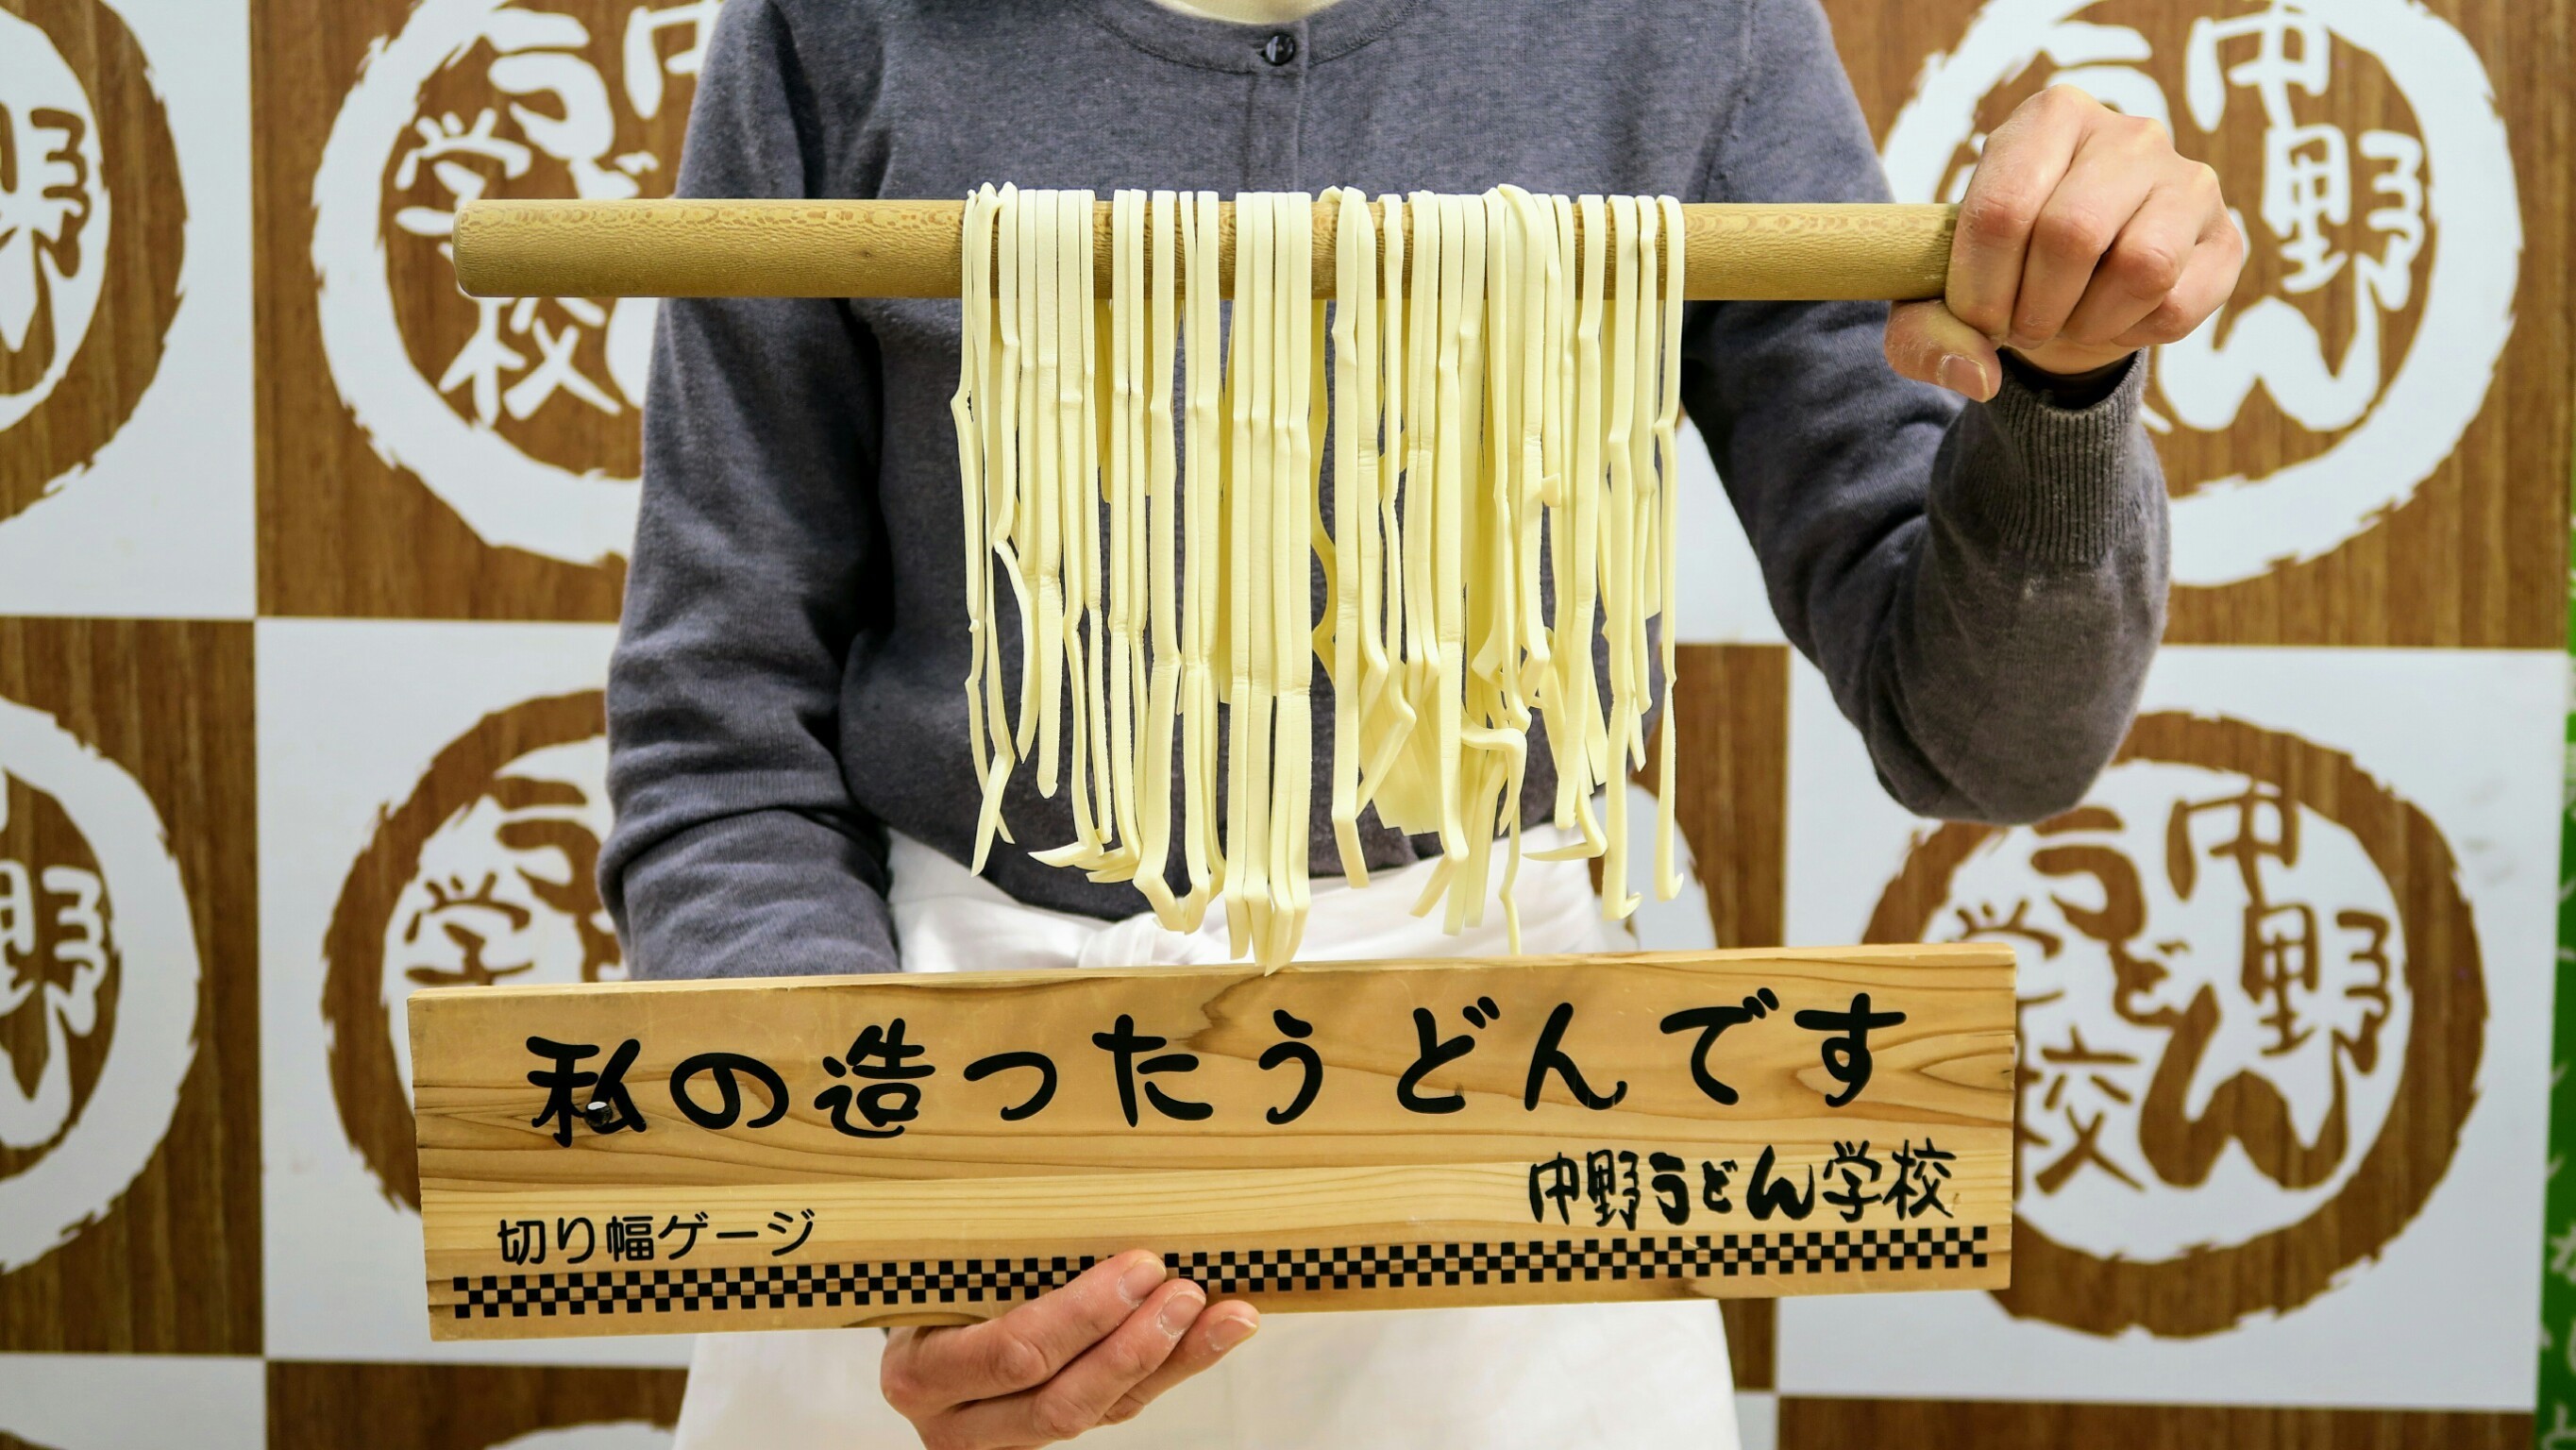 Udon noodle making experience